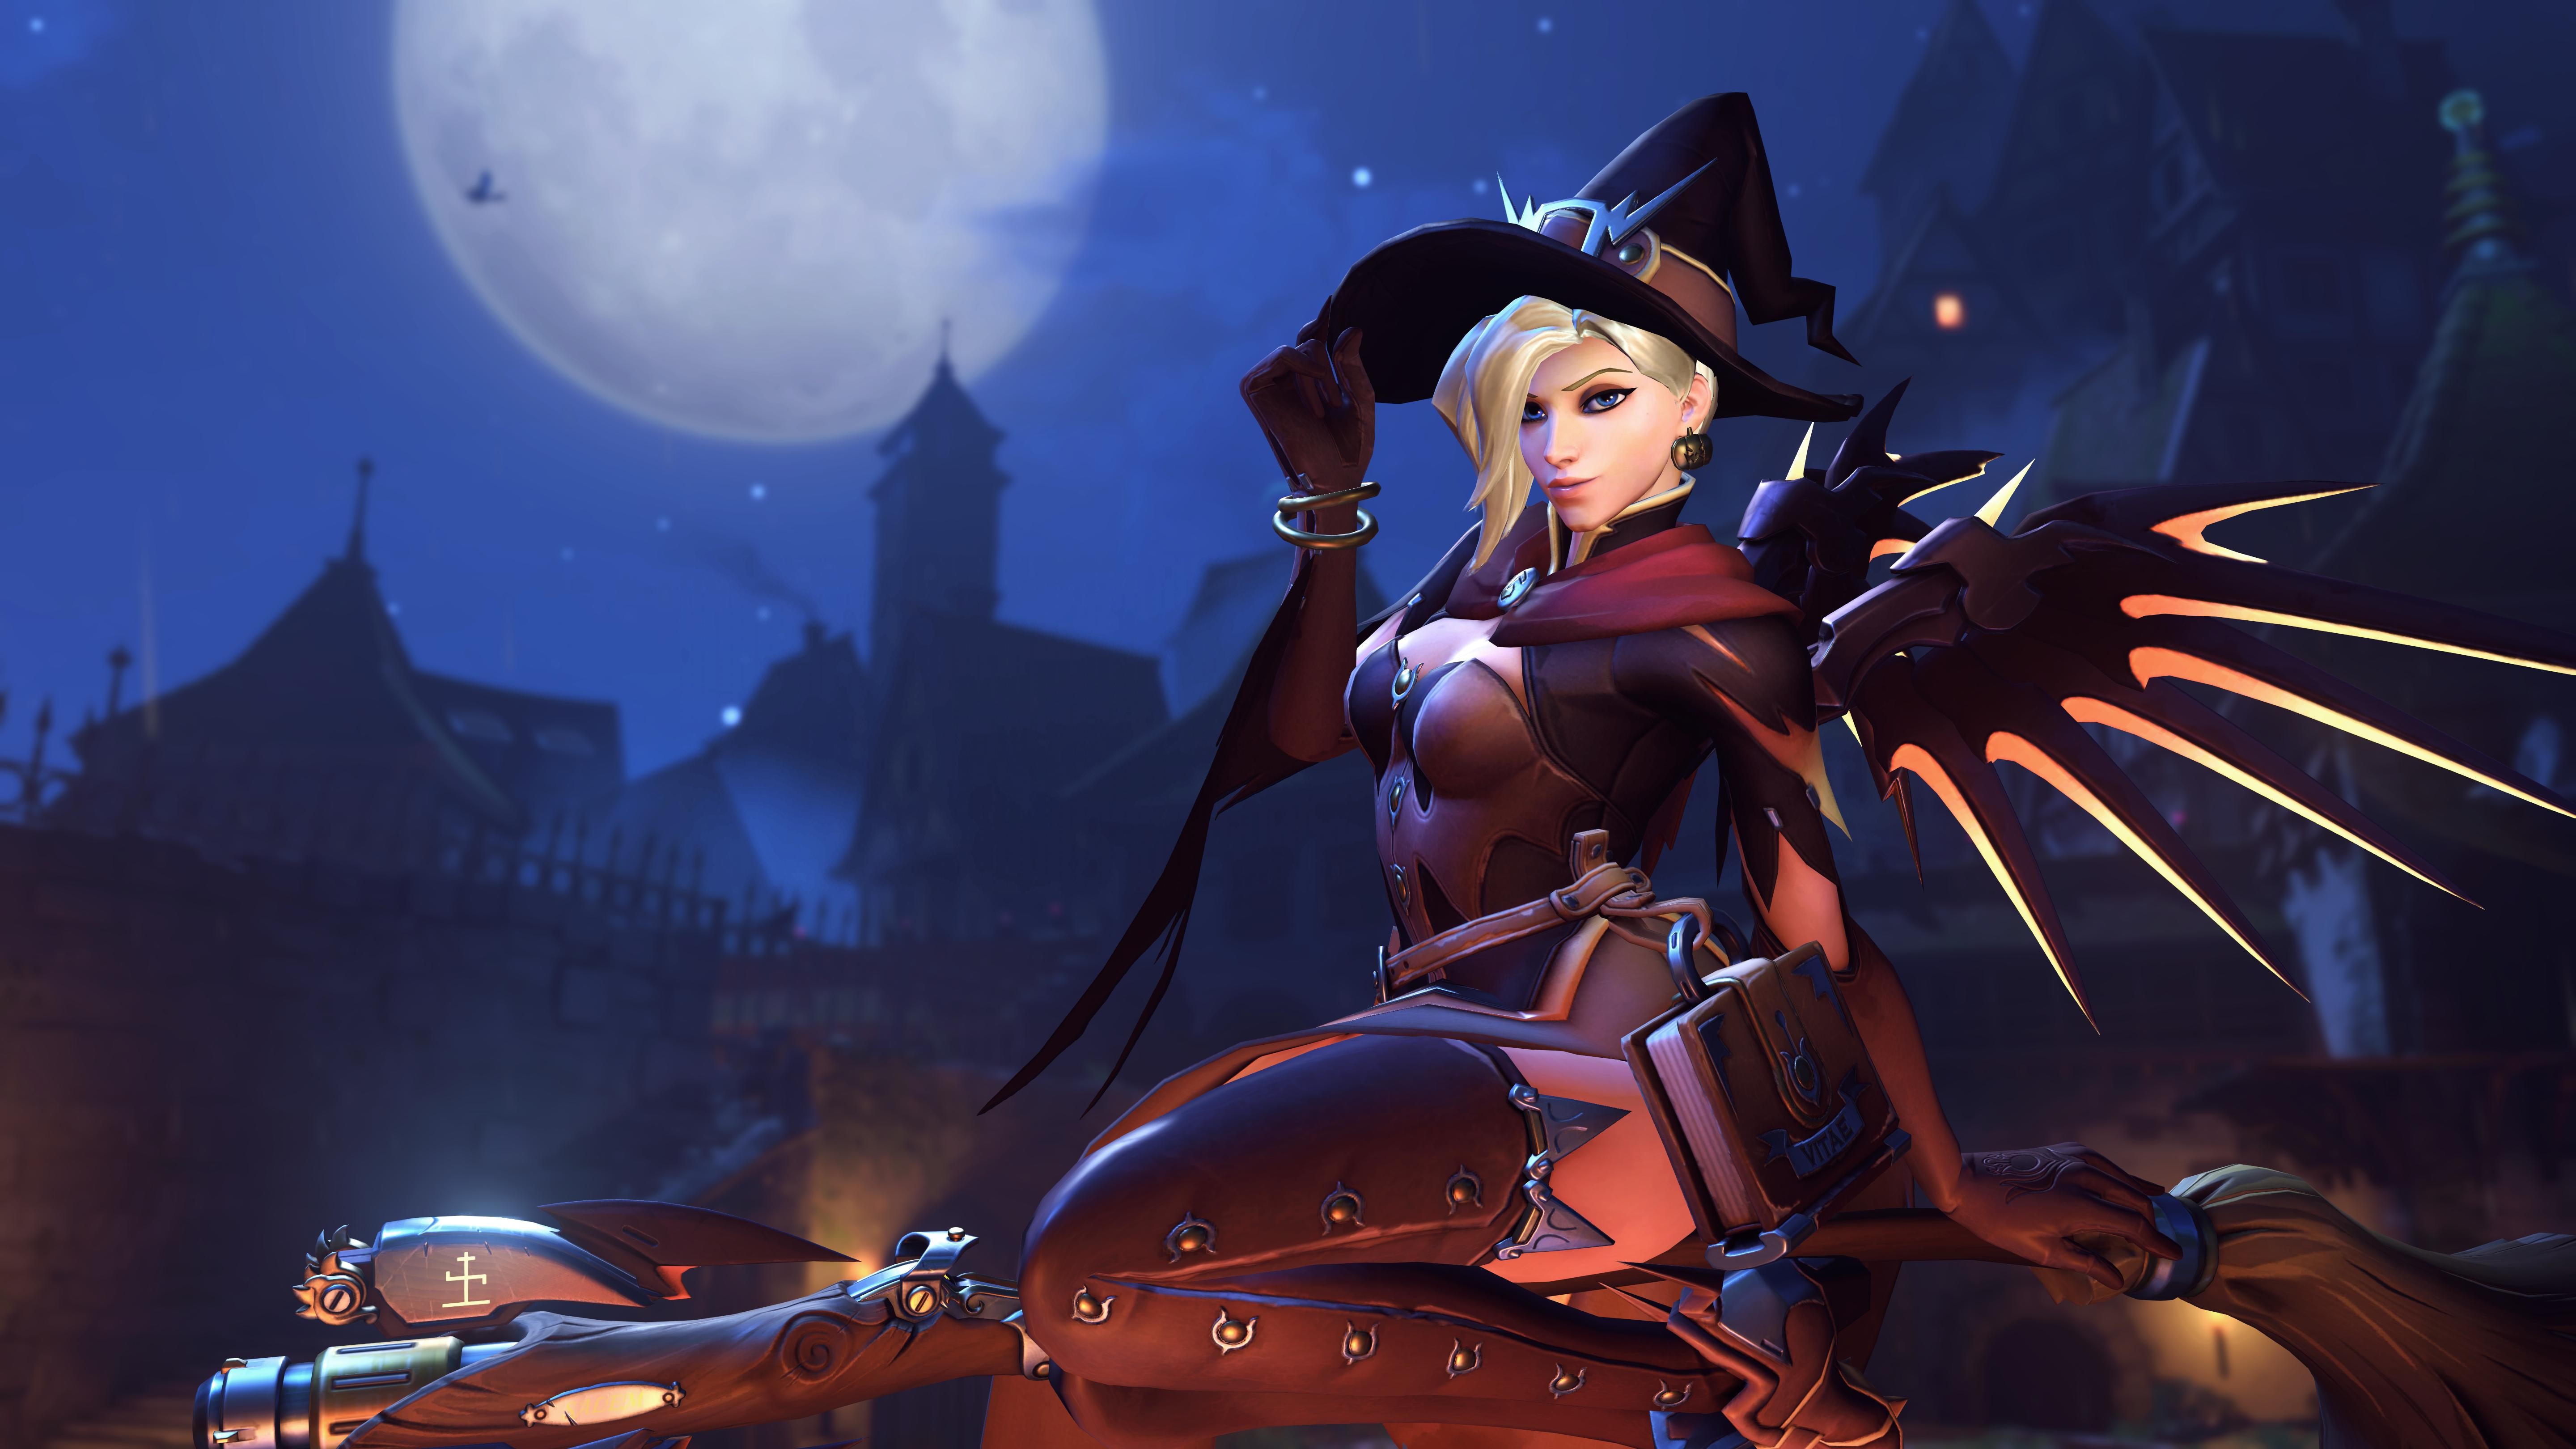 General 5760x3240 Overwatch Mercy (Overwatch) witch Halloween Blizzard Entertainment video games Moon night thighs bent legs blonde wings witch hat